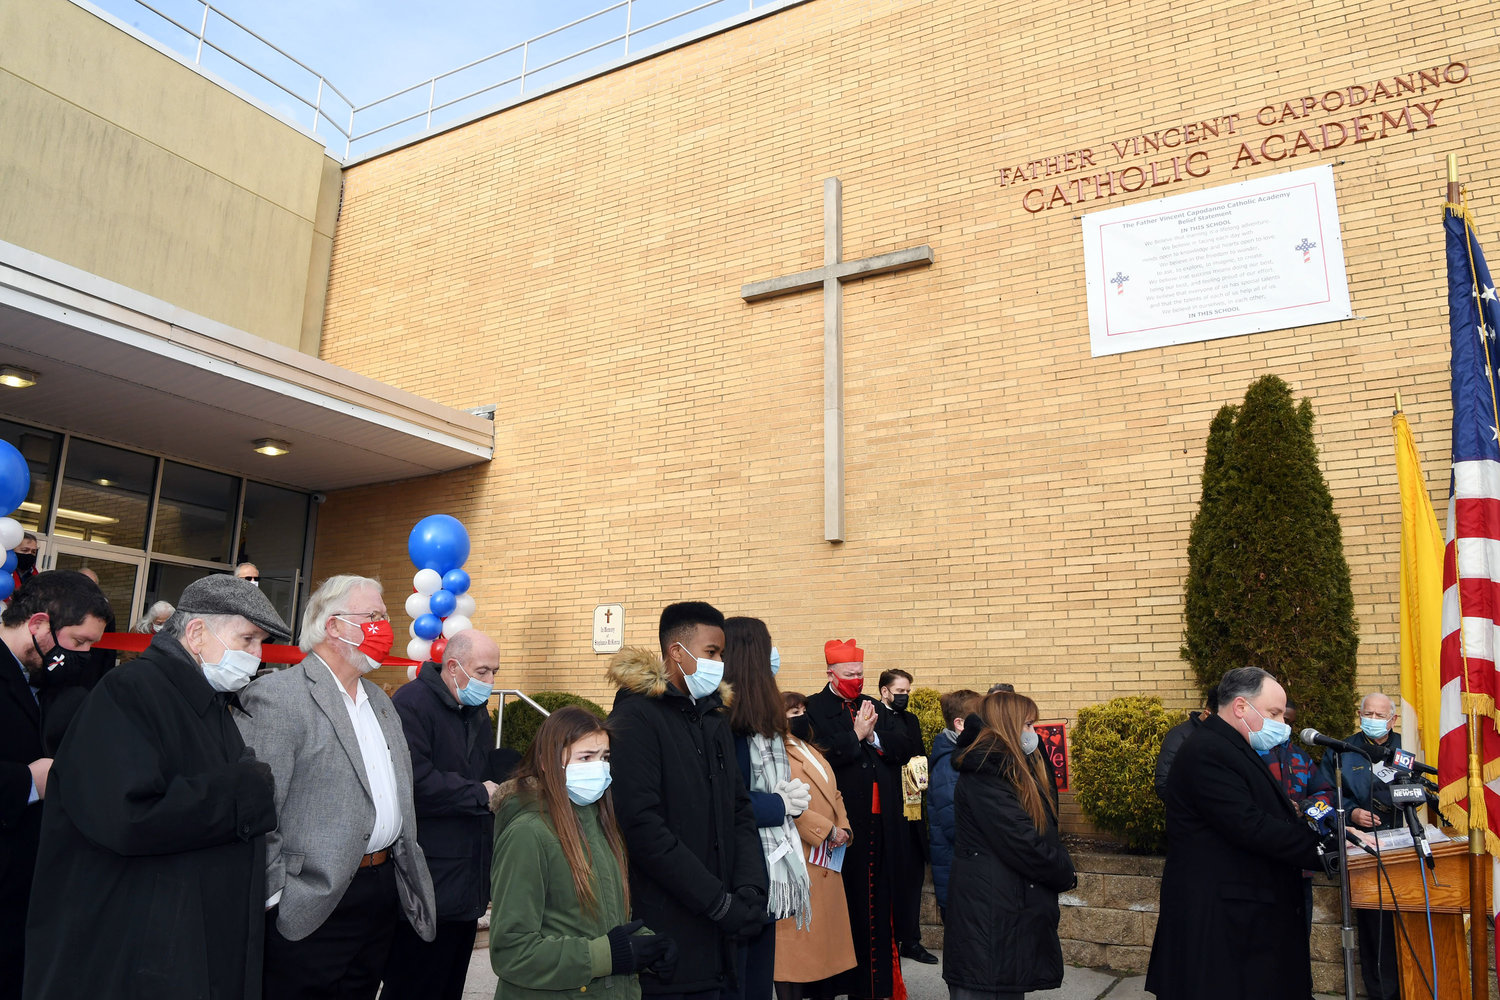 Father Michael Martine, pastor of Holy Rosary parish, gives the opening prayer at the dedication of Father Vincent Capodanno Catholic Academy on Staten Island Jan. 21.